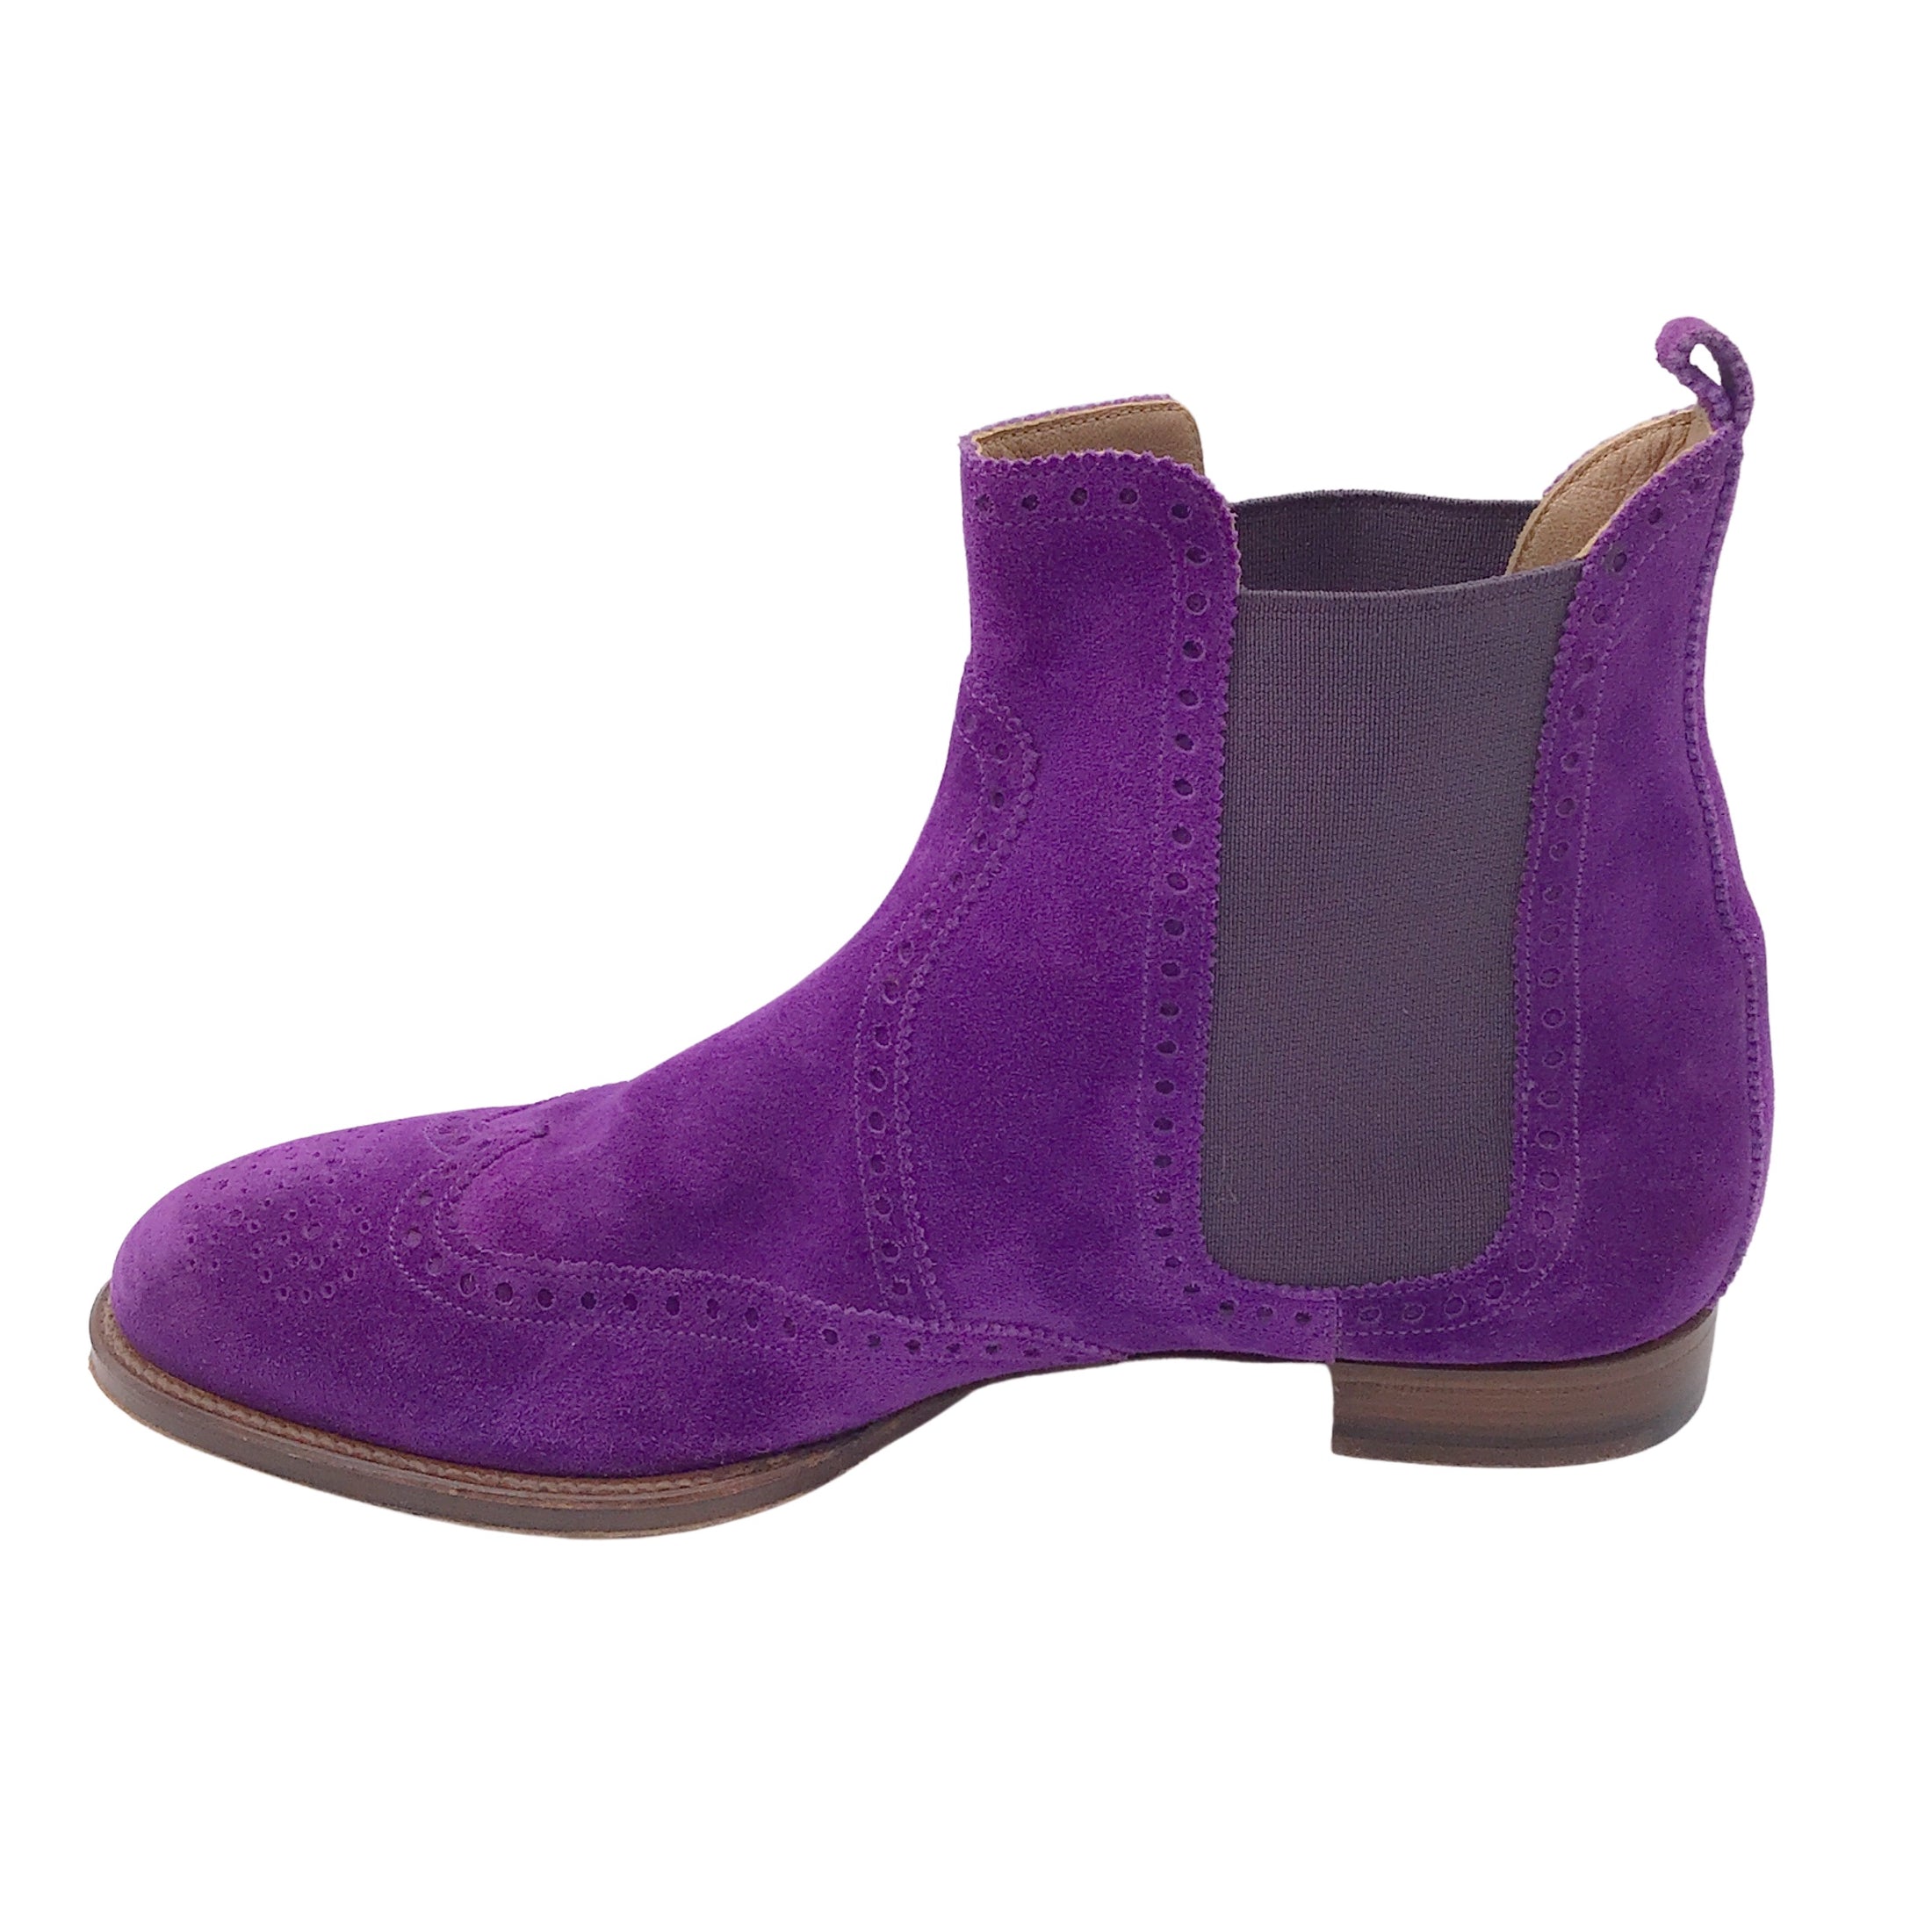 Hermes Purple Brighton Suede Leather Pull-On Ankle Boots